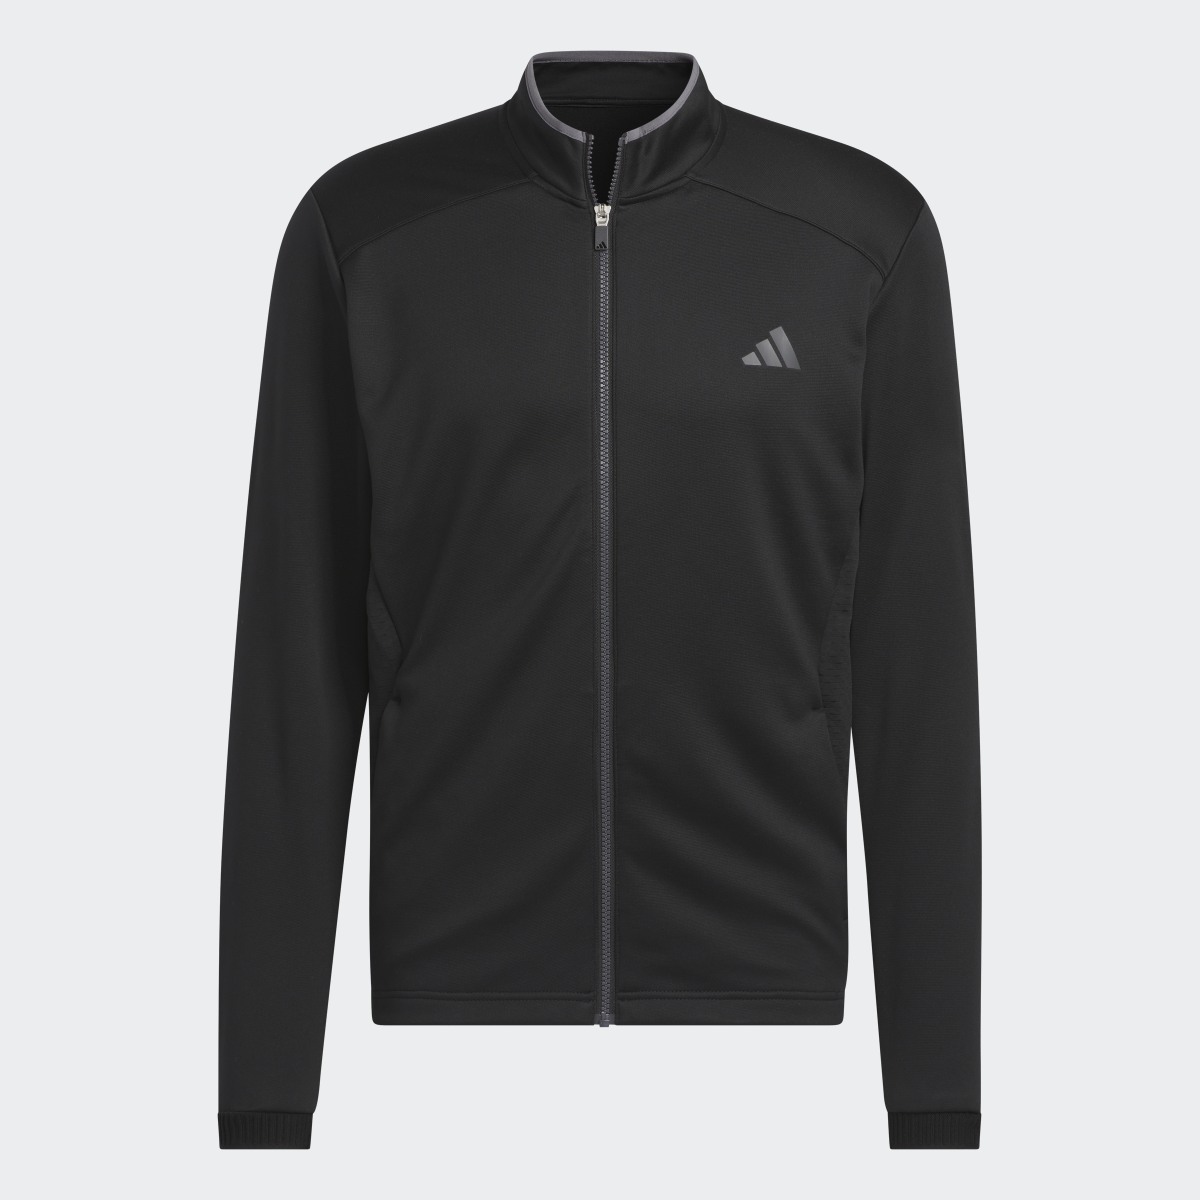 Adidas COLD.RDY Full-Zip Jacket. 5